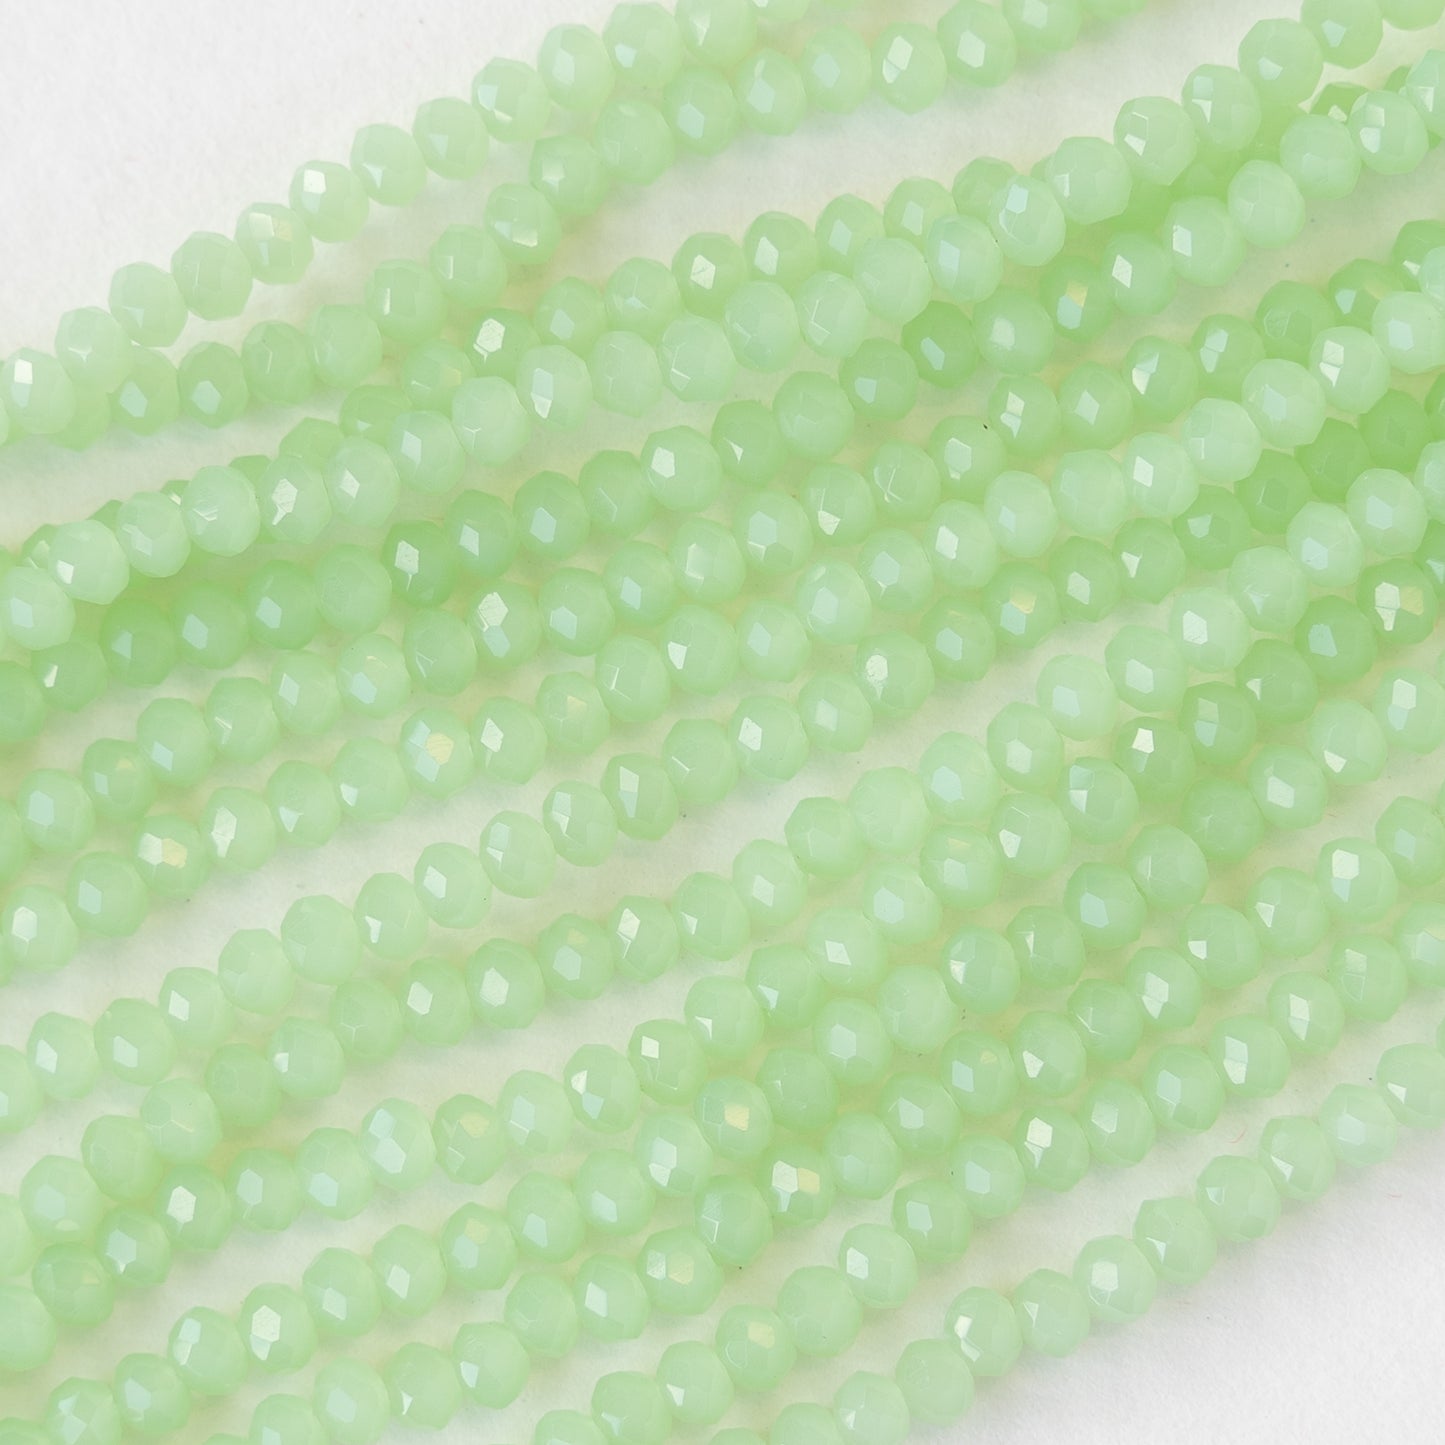 3x2mm Faceted Glass Rondelle Beads - Light Green - 16 Inches